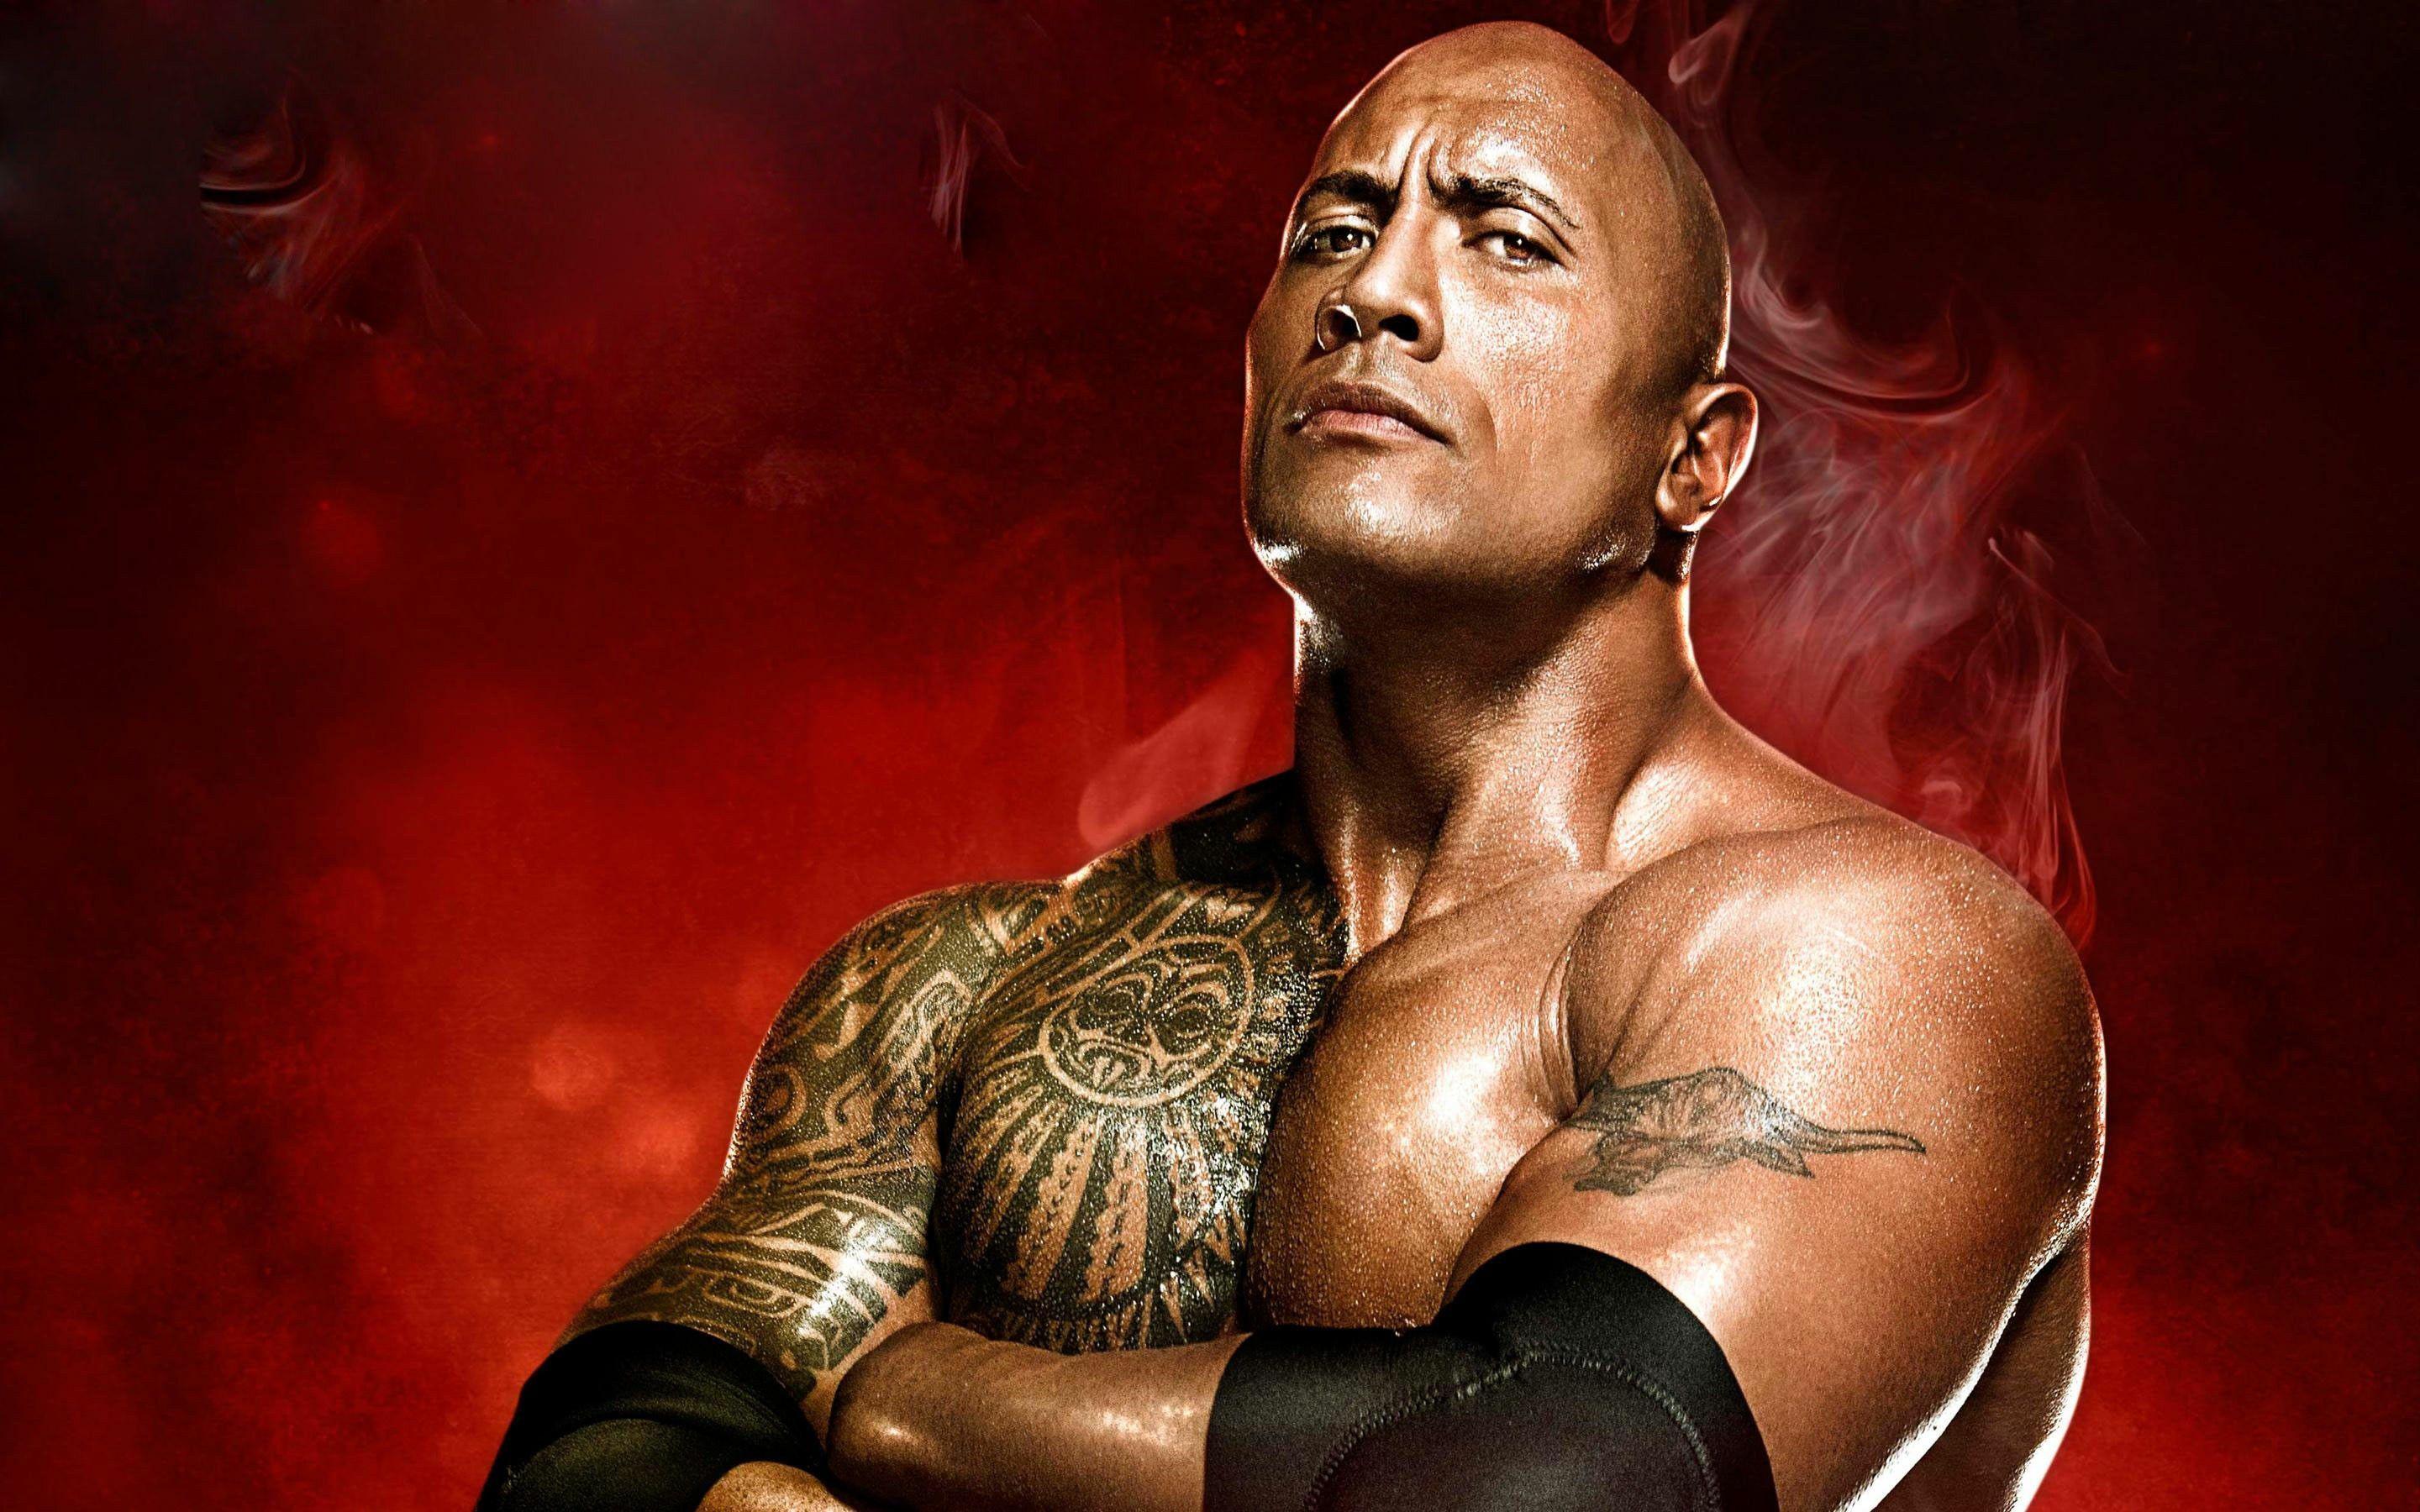 Wwe Games The Rock HD Background Roman Reigns New 2017 Wallpaper Of